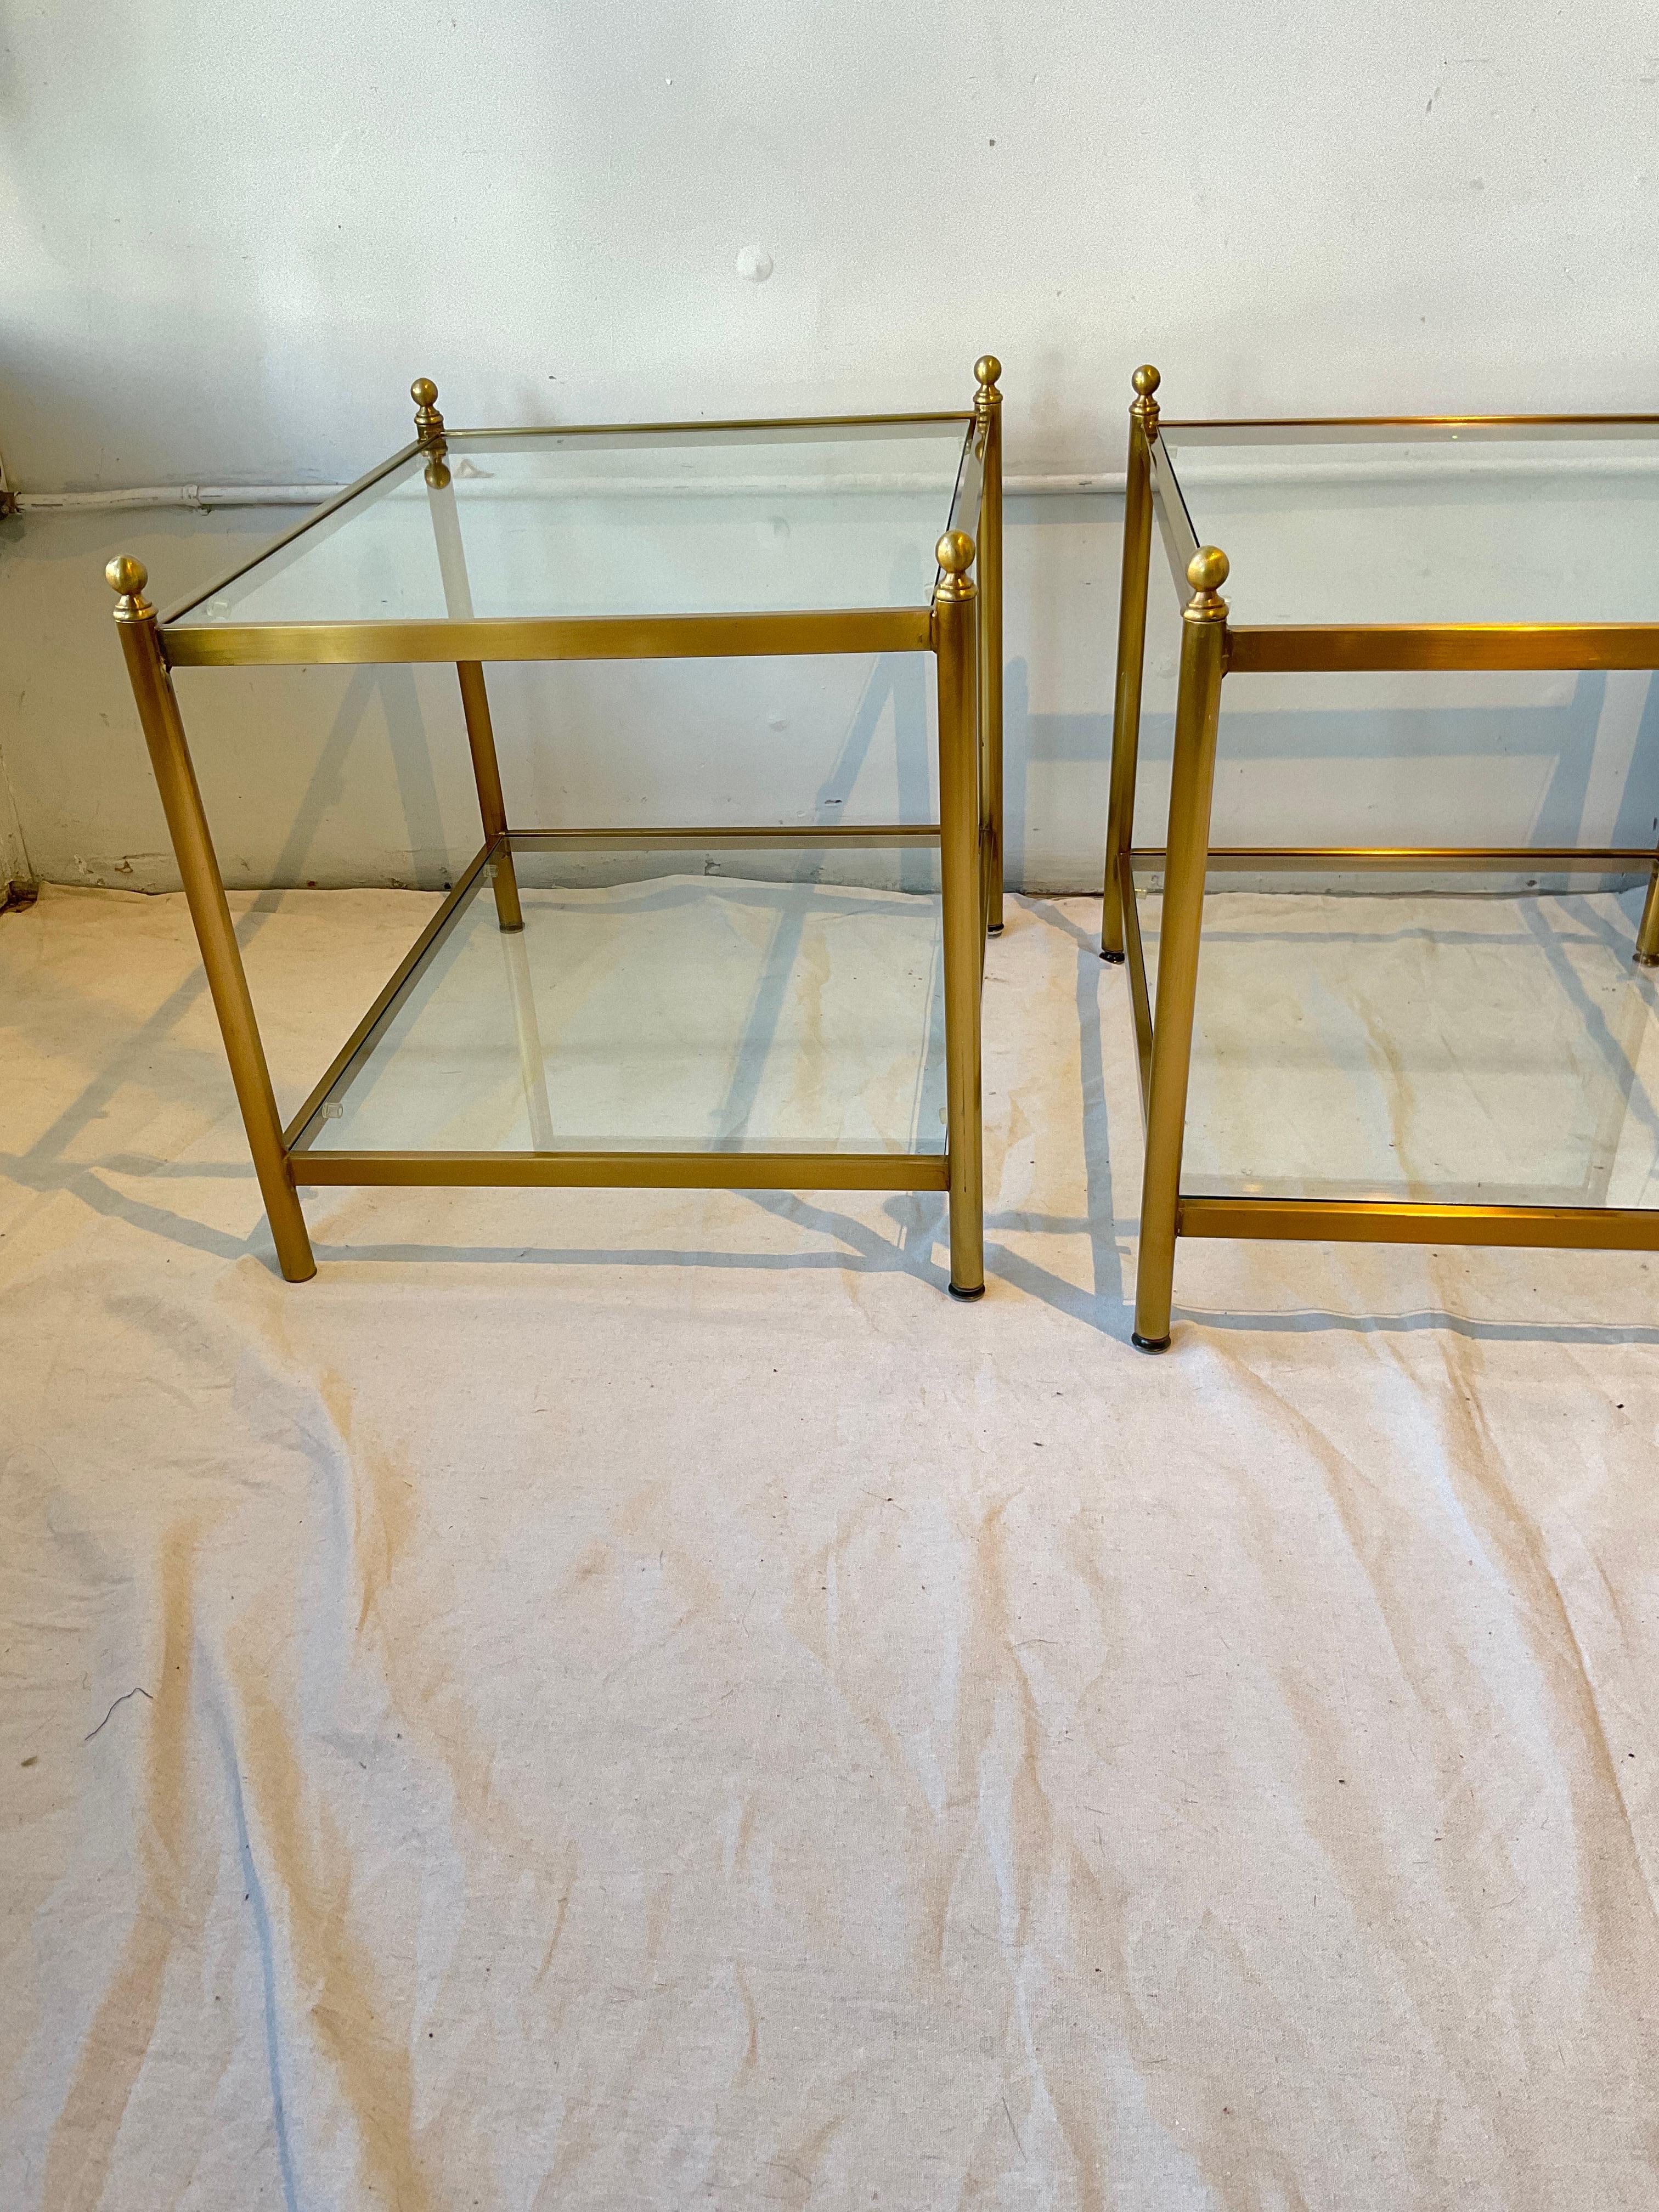 Pair of brass coated two tier side tables. Small chip in one piece of glass as shown in last image.